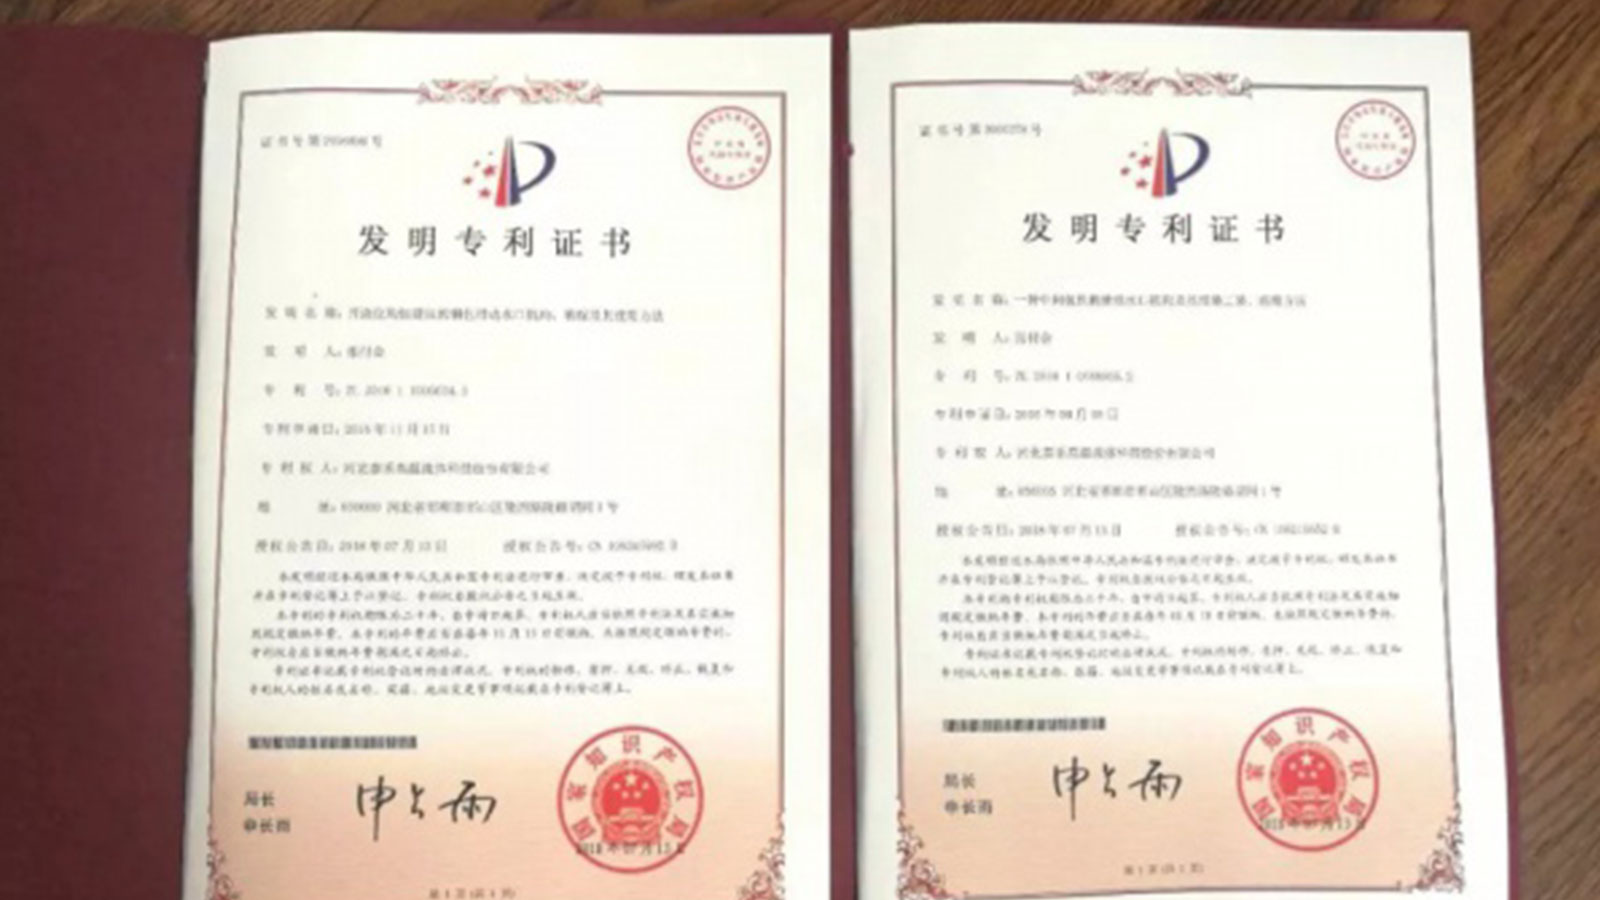 Taihe High Temperature Technology obtained again two invention patents